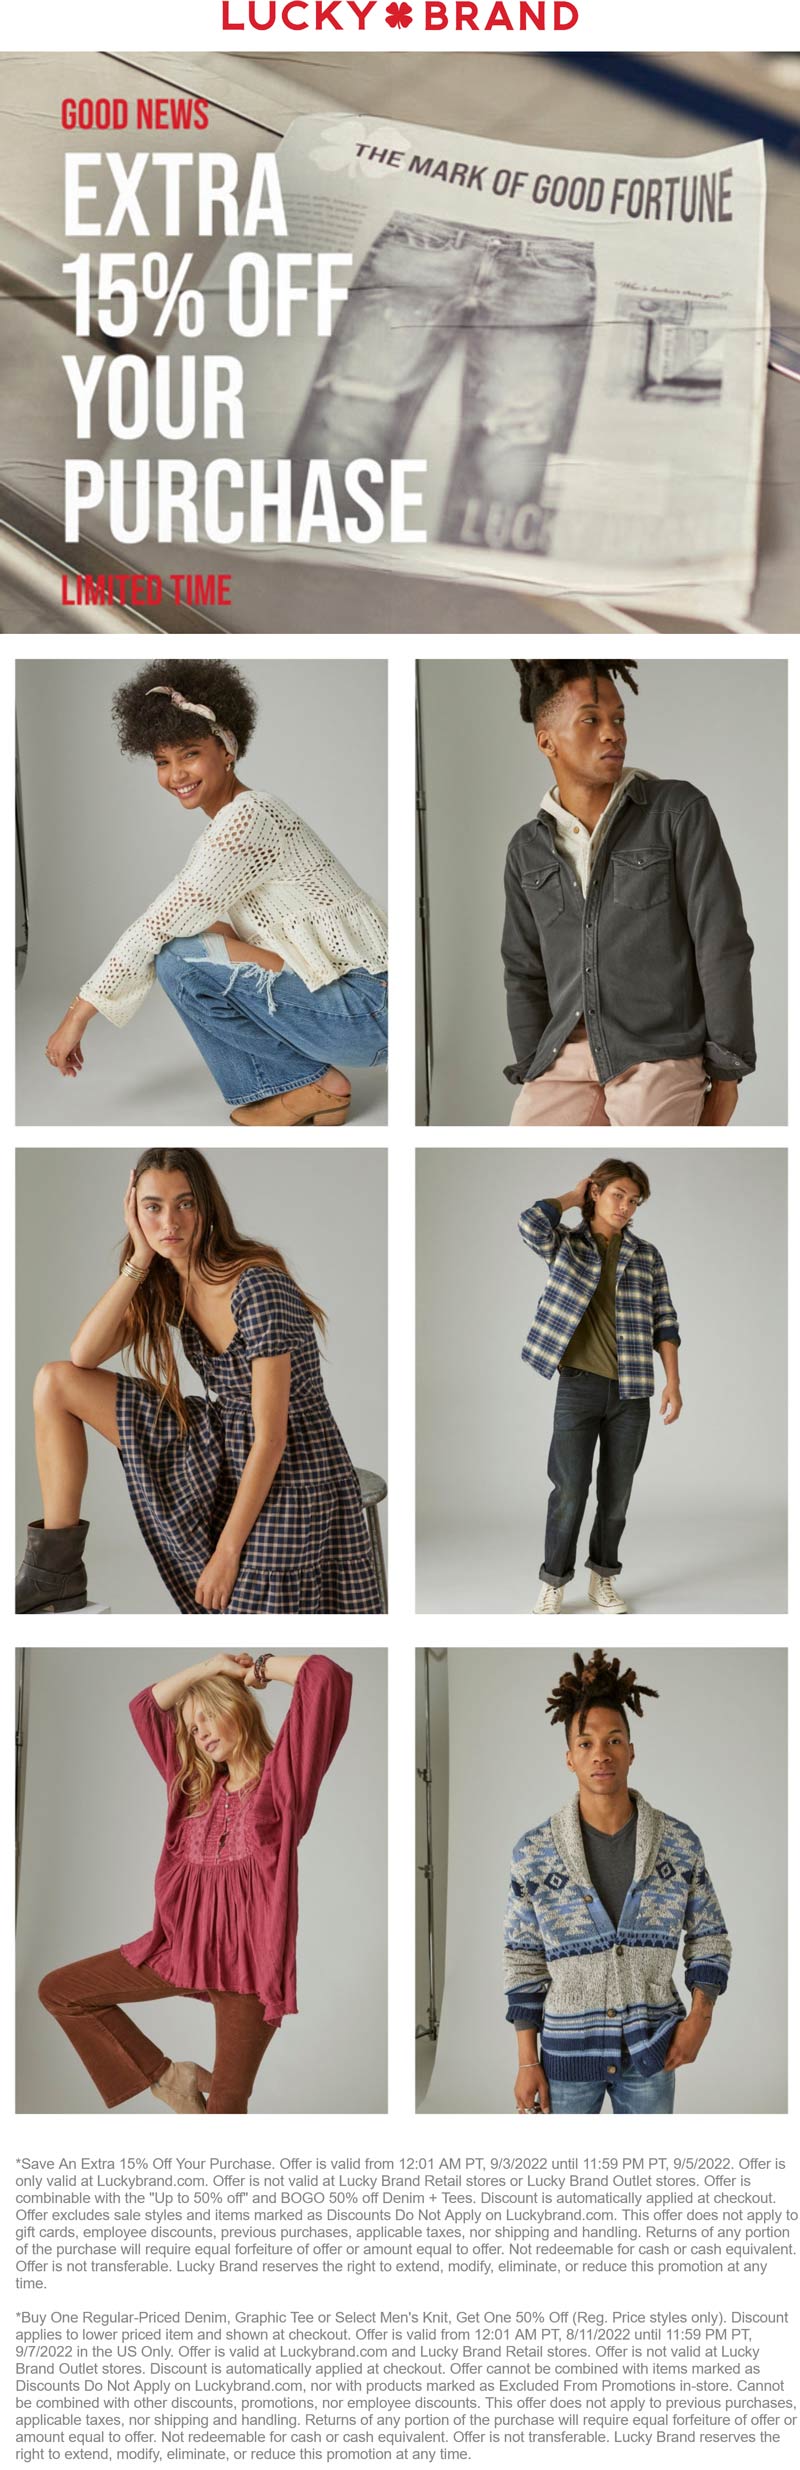 Lucky Brand stores Coupon  Extra 15% off online at Lucky Brand #luckybrand 